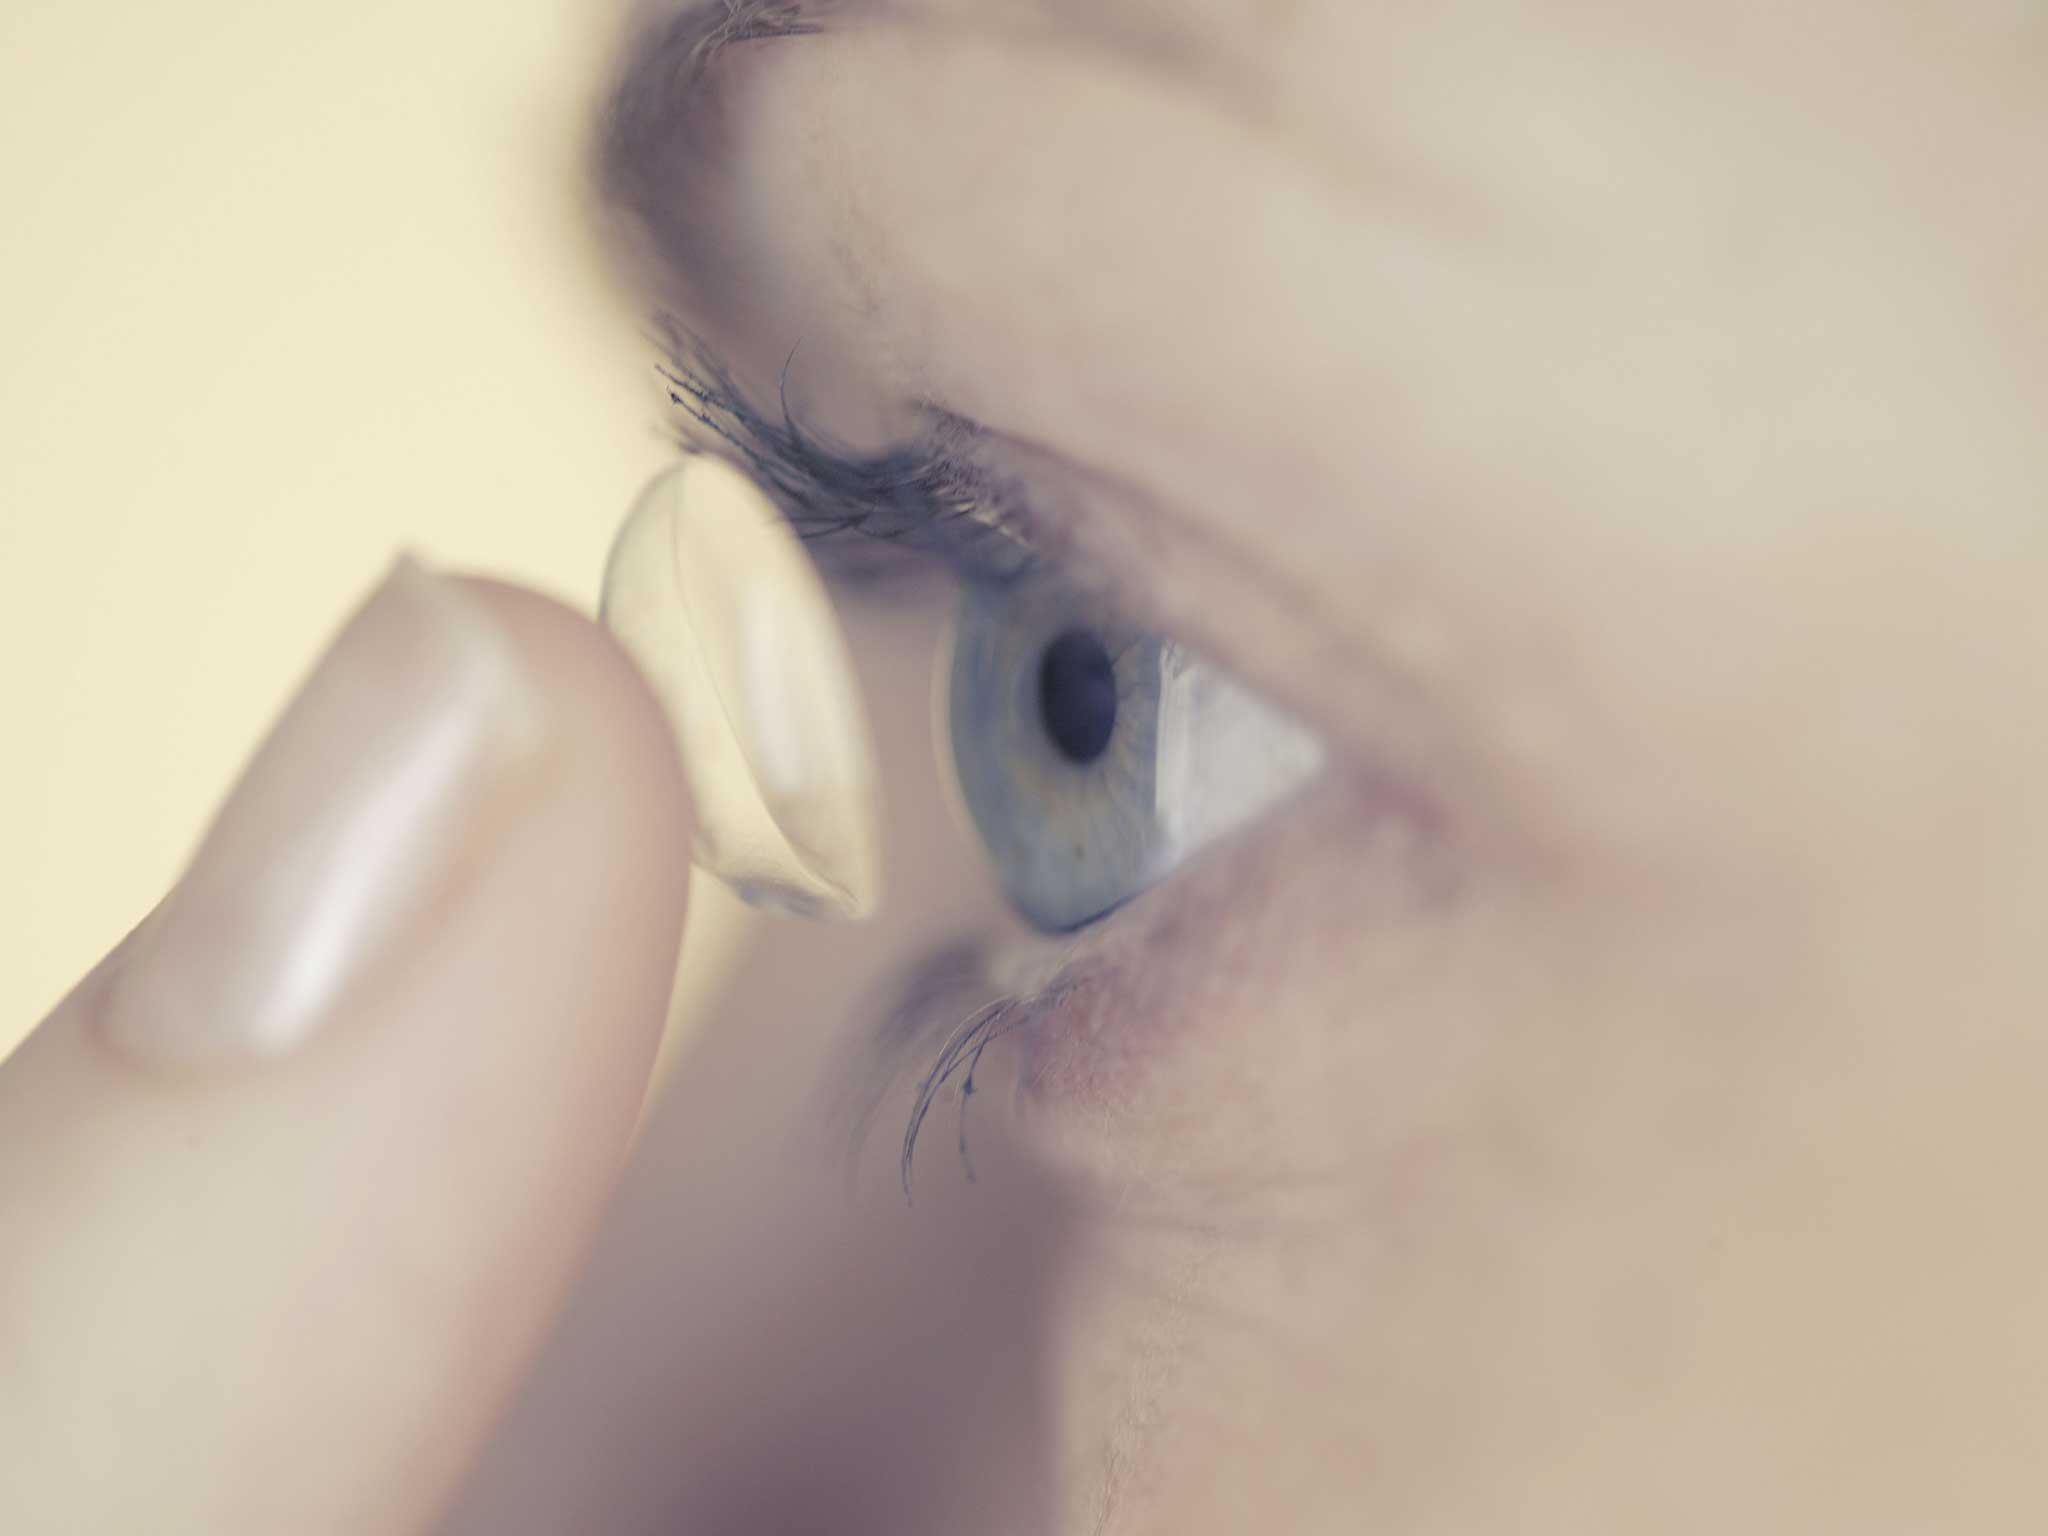 Scientists hope the lenses could help elderly sufferers of macular degeneration